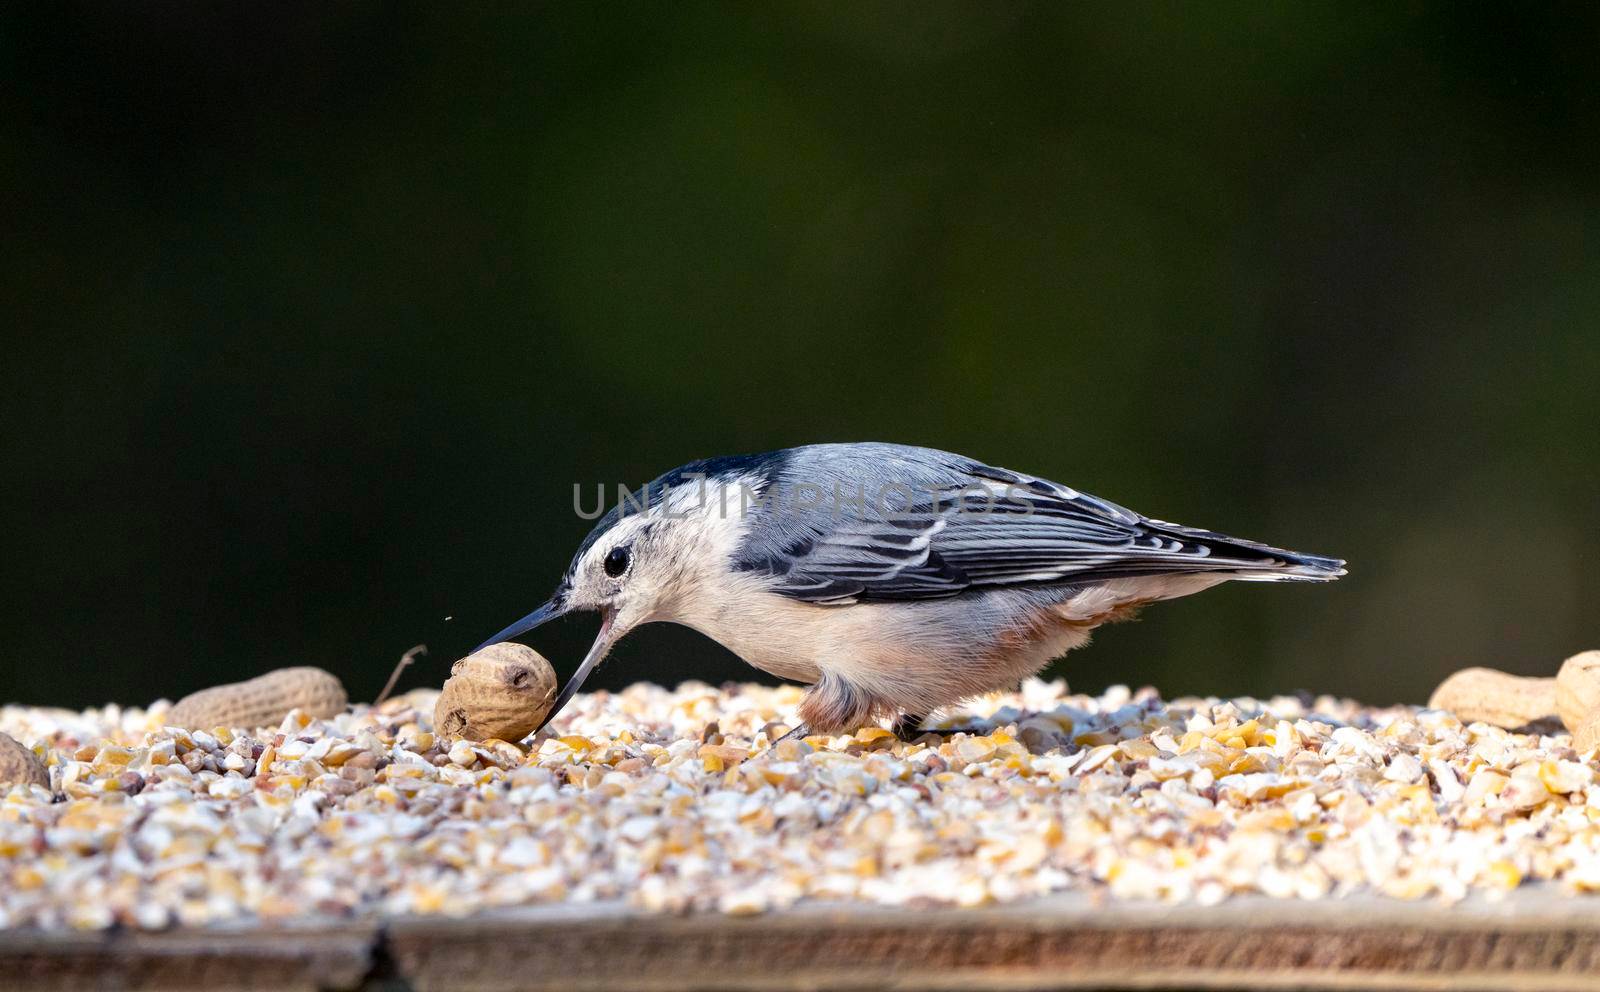 Nuthatch at feeder by pictureguy